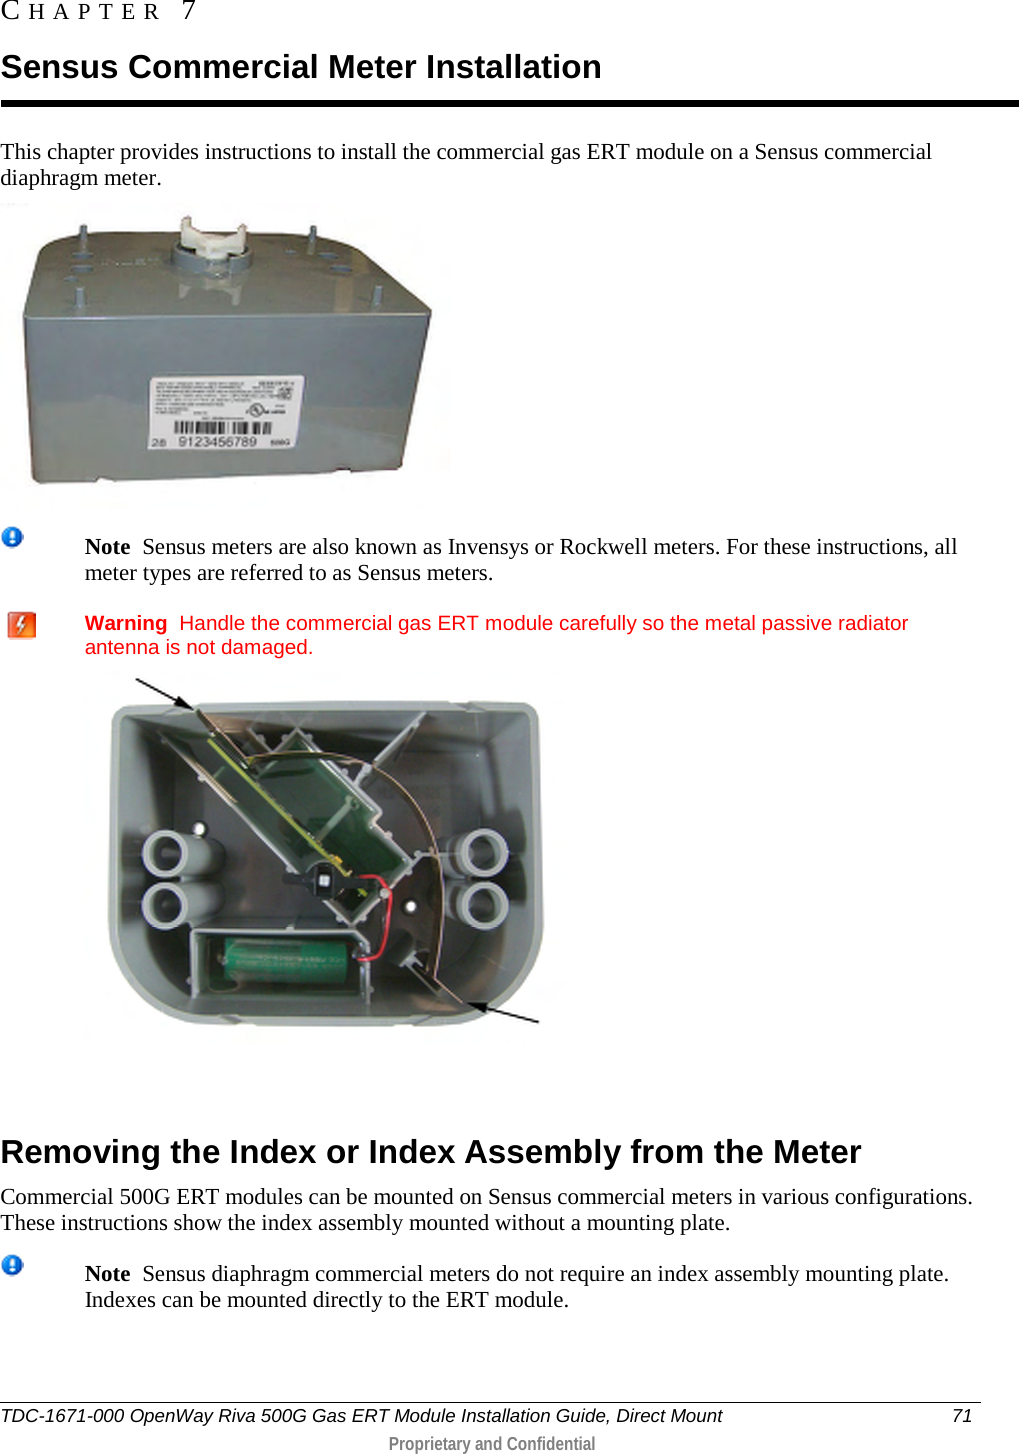  This chapter provides instructions to install the commercial gas ERT module on a Sensus commercial diaphragm meter.   Note  Sensus meters are also known as Invensys or Rockwell meters. For these instructions, all meter types are referred to as Sensus meters.    Warning  Handle the commercial gas ERT module carefully so the metal passive radiator antenna is not damaged.    Removing the Index or Index Assembly from the Meter Commercial 500G ERT modules can be mounted on Sensus commercial meters in various configurations. These instructions show the index assembly mounted without a mounting plate.  Note  Sensus diaphragm commercial meters do not require an index assembly mounting plate. Indexes can be mounted directly to the ERT module.     CHAPTER  7  Sensus Commercial Meter Installation TDC-1671-000 OpenWay Riva 500G Gas ERT Module Installation Guide, Direct Mount 71   Proprietary and Confidential  